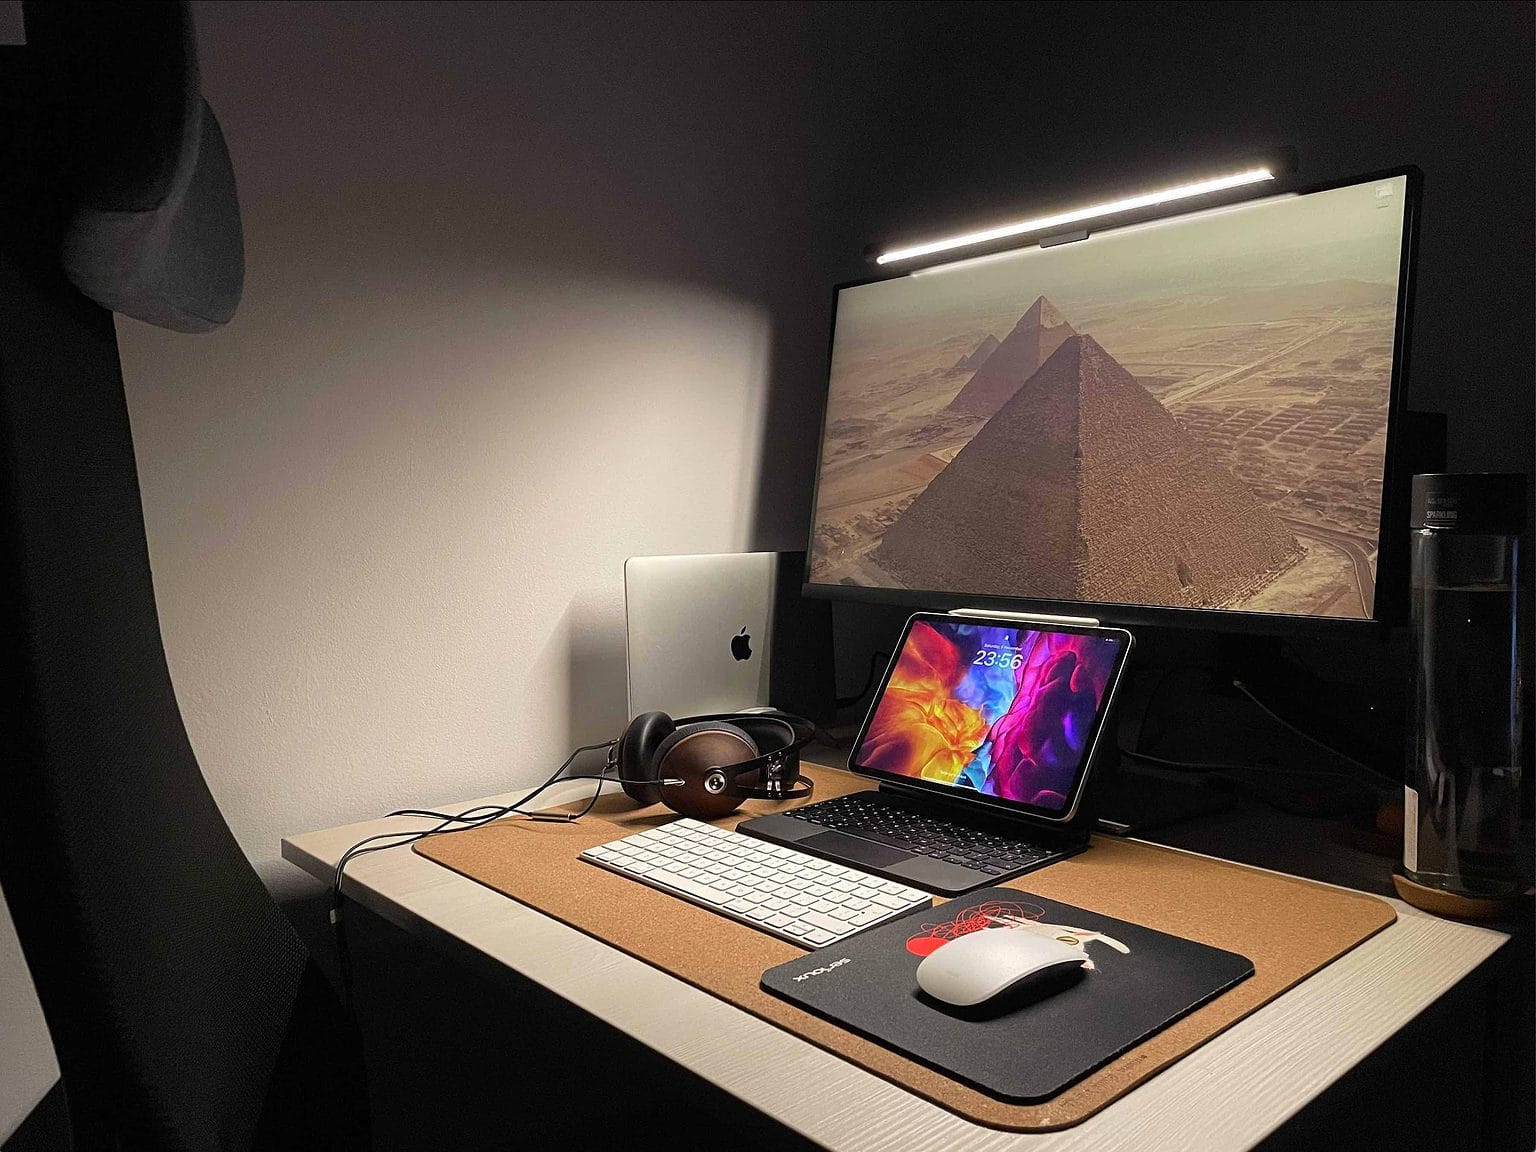 Would you keep the iPad Pro in the middle of the setup like that?